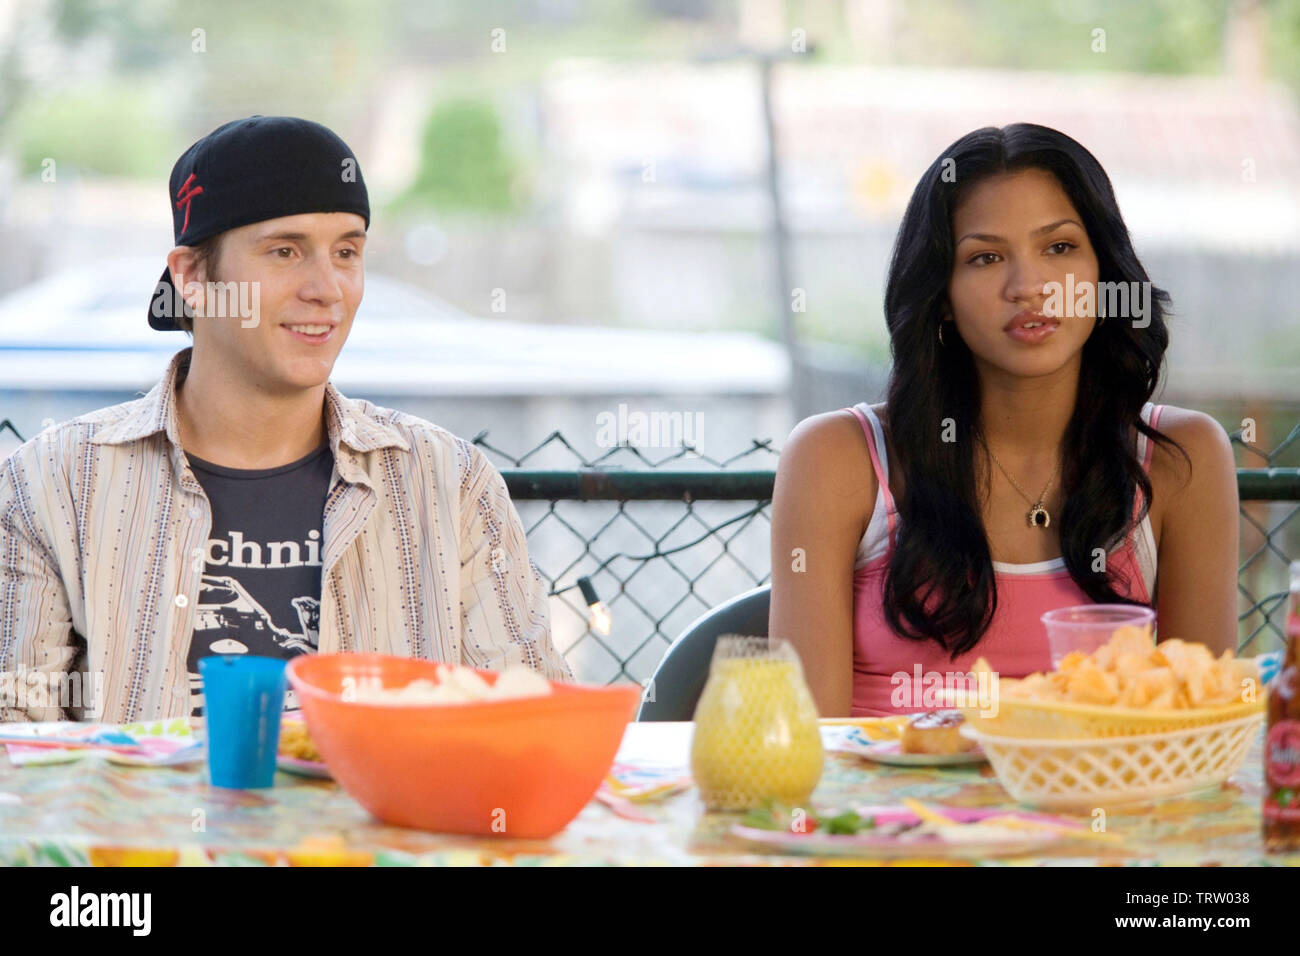 CASSIE VENTURA and ROBERT HOFFMAN in STEP UP 2: THE STREETS (2008). Copyright: Editorial use only. No merchandising or book covers. This is a publicly distributed handout. Access rights only, no license of copyright provided. Only to be reproduced in conjunction with promotion of this film. Credit: OFFSPRING ENTERTAINMENT/SUMMIT ENTERTAINMENT/TOUCHSTONE PICT / BALLARD, KAREN / Album Stock Photo